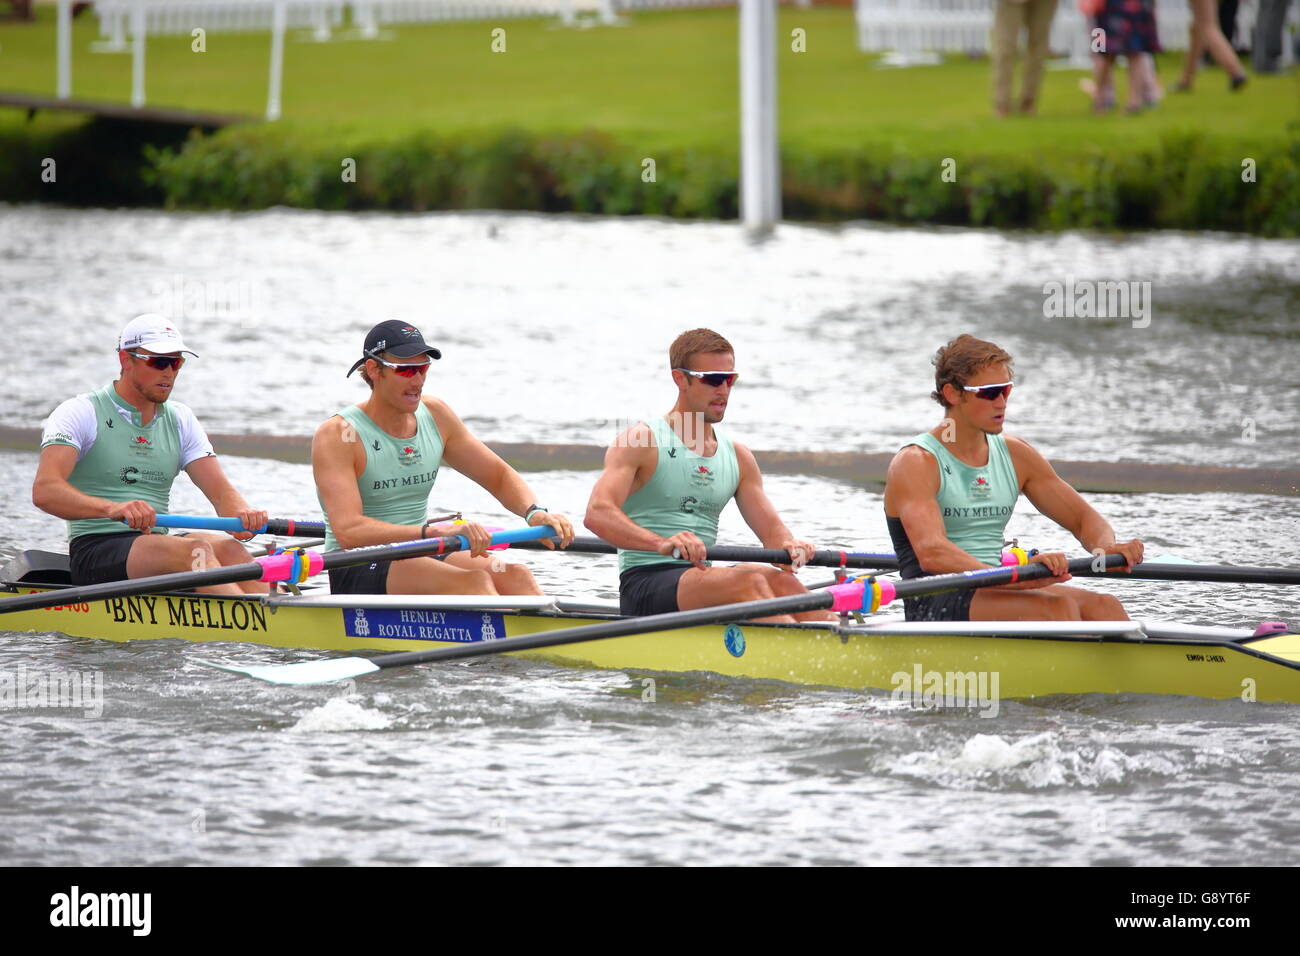 Rowers from all over the world came to the annual Henley Royal Regatta 2016 Stock Photo